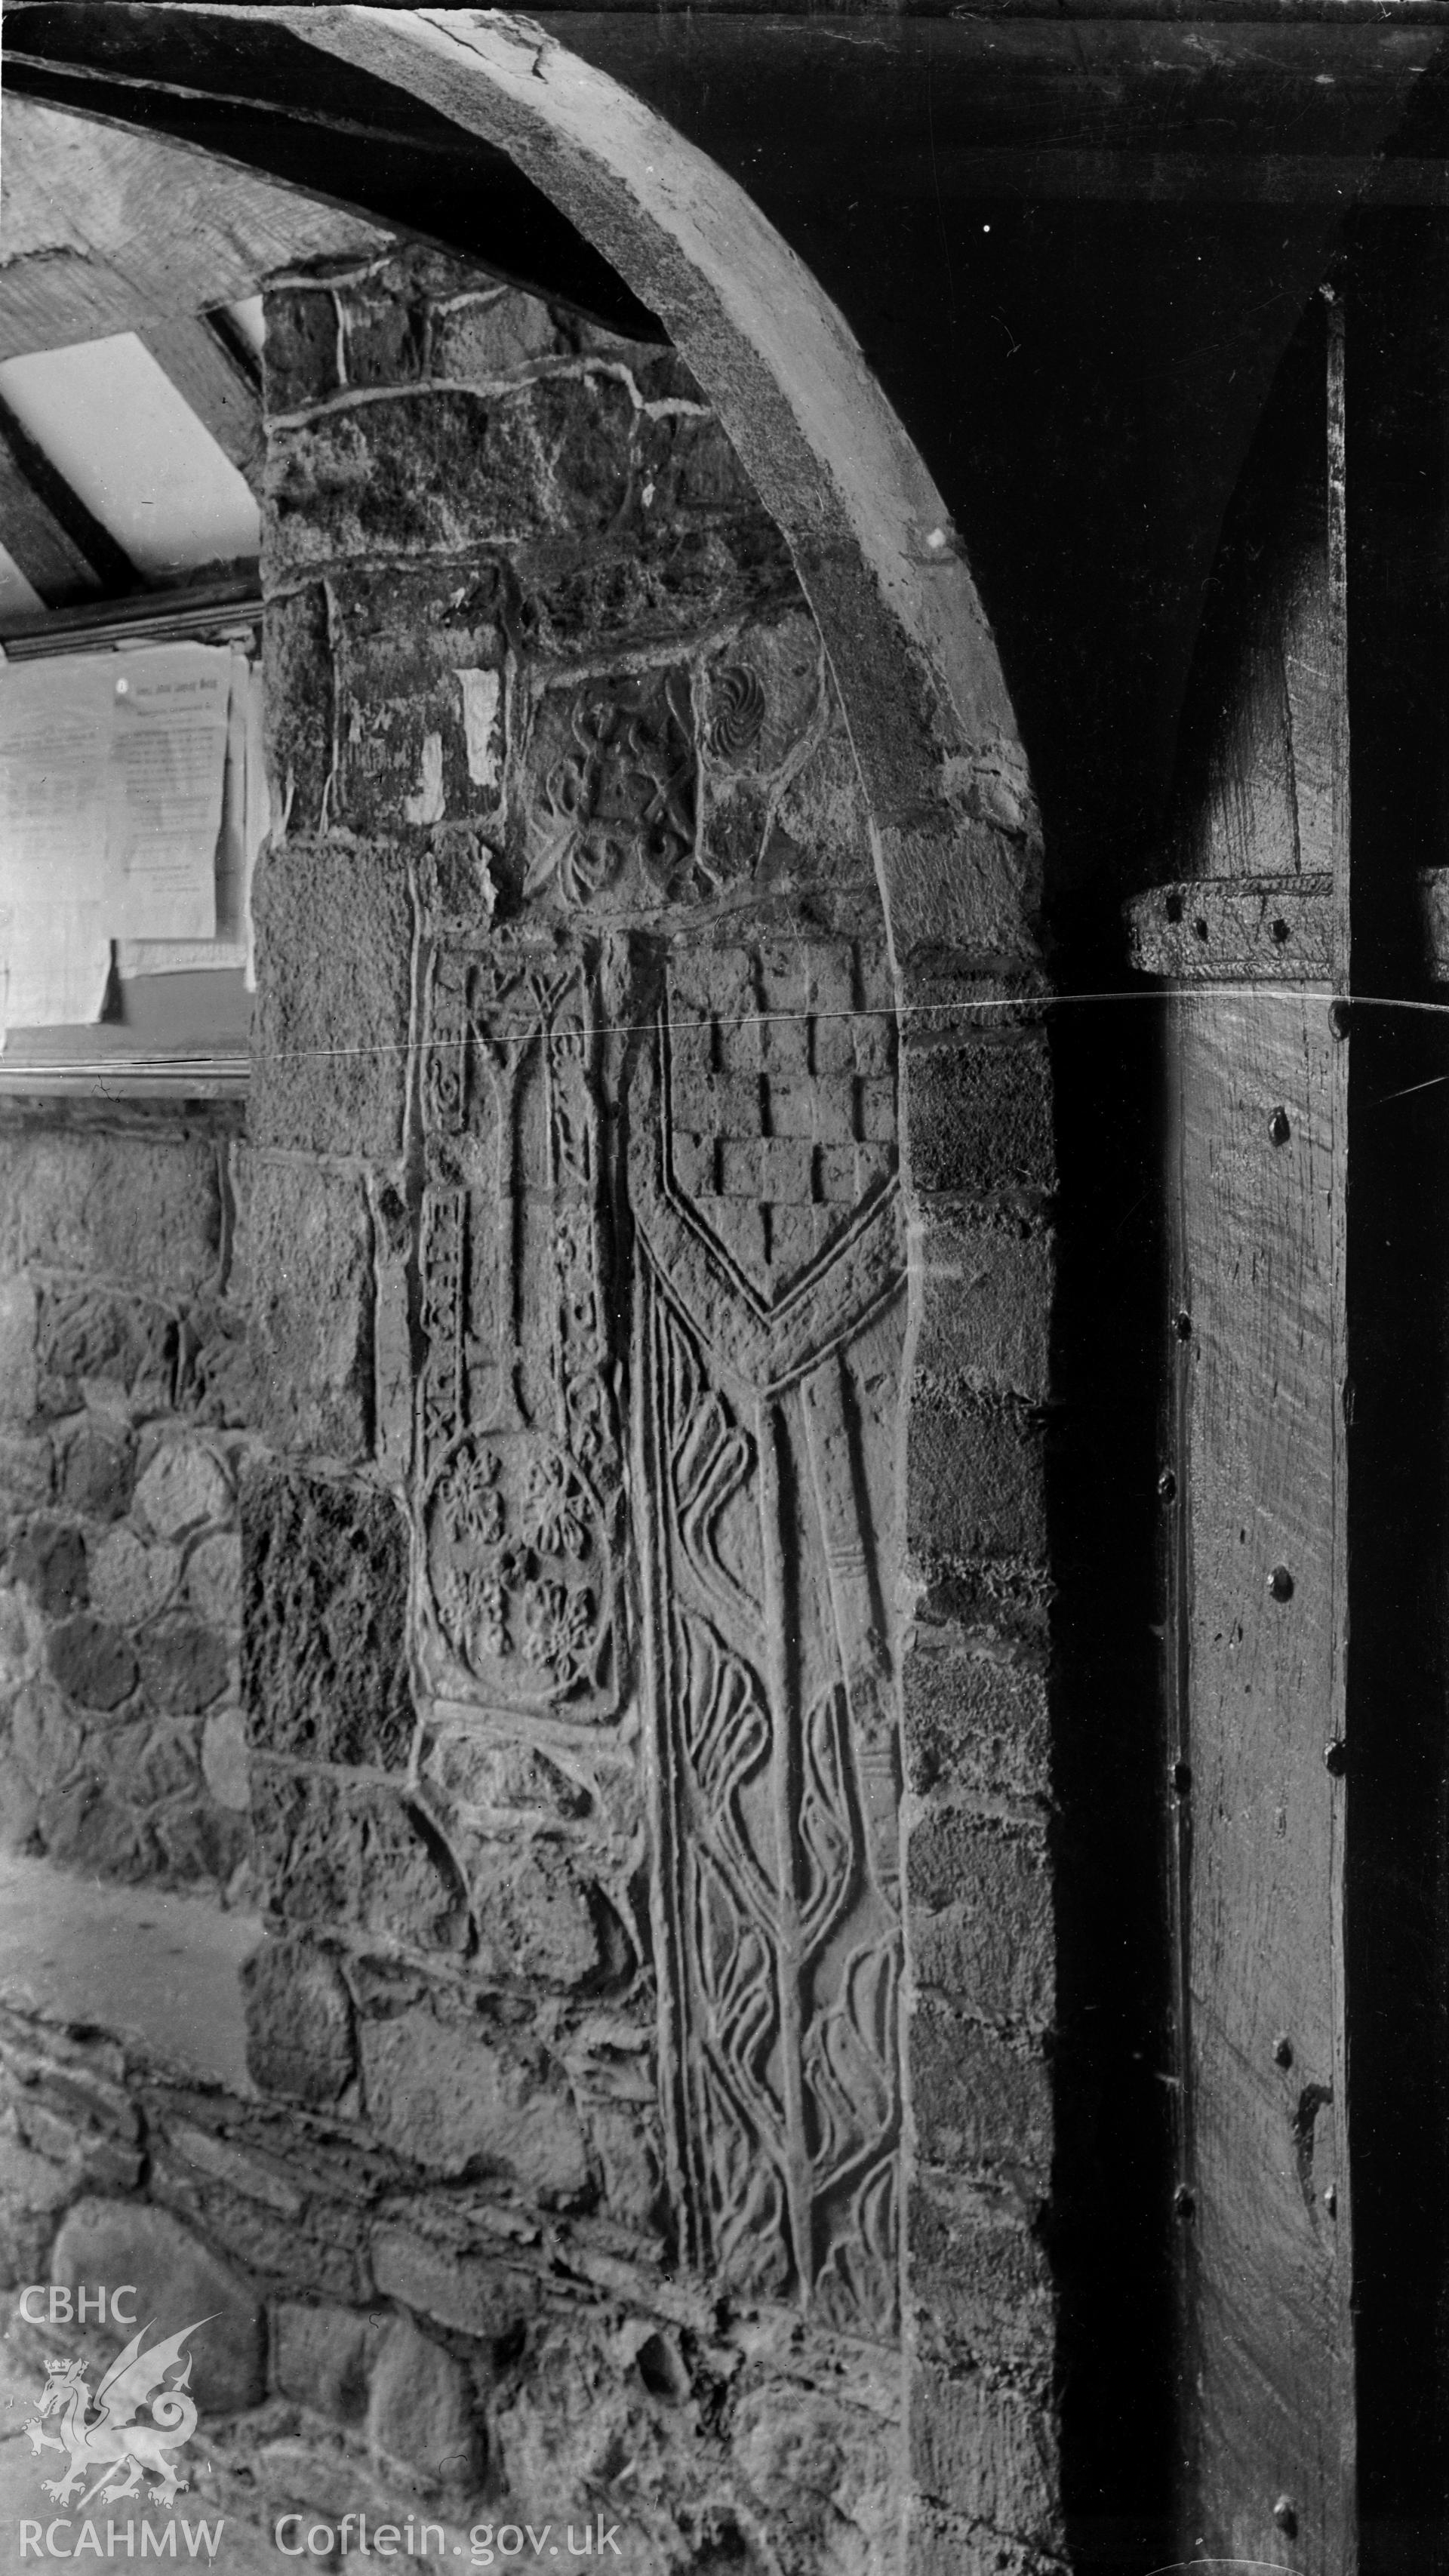 Interior: detail of doorway and inscribed stone.